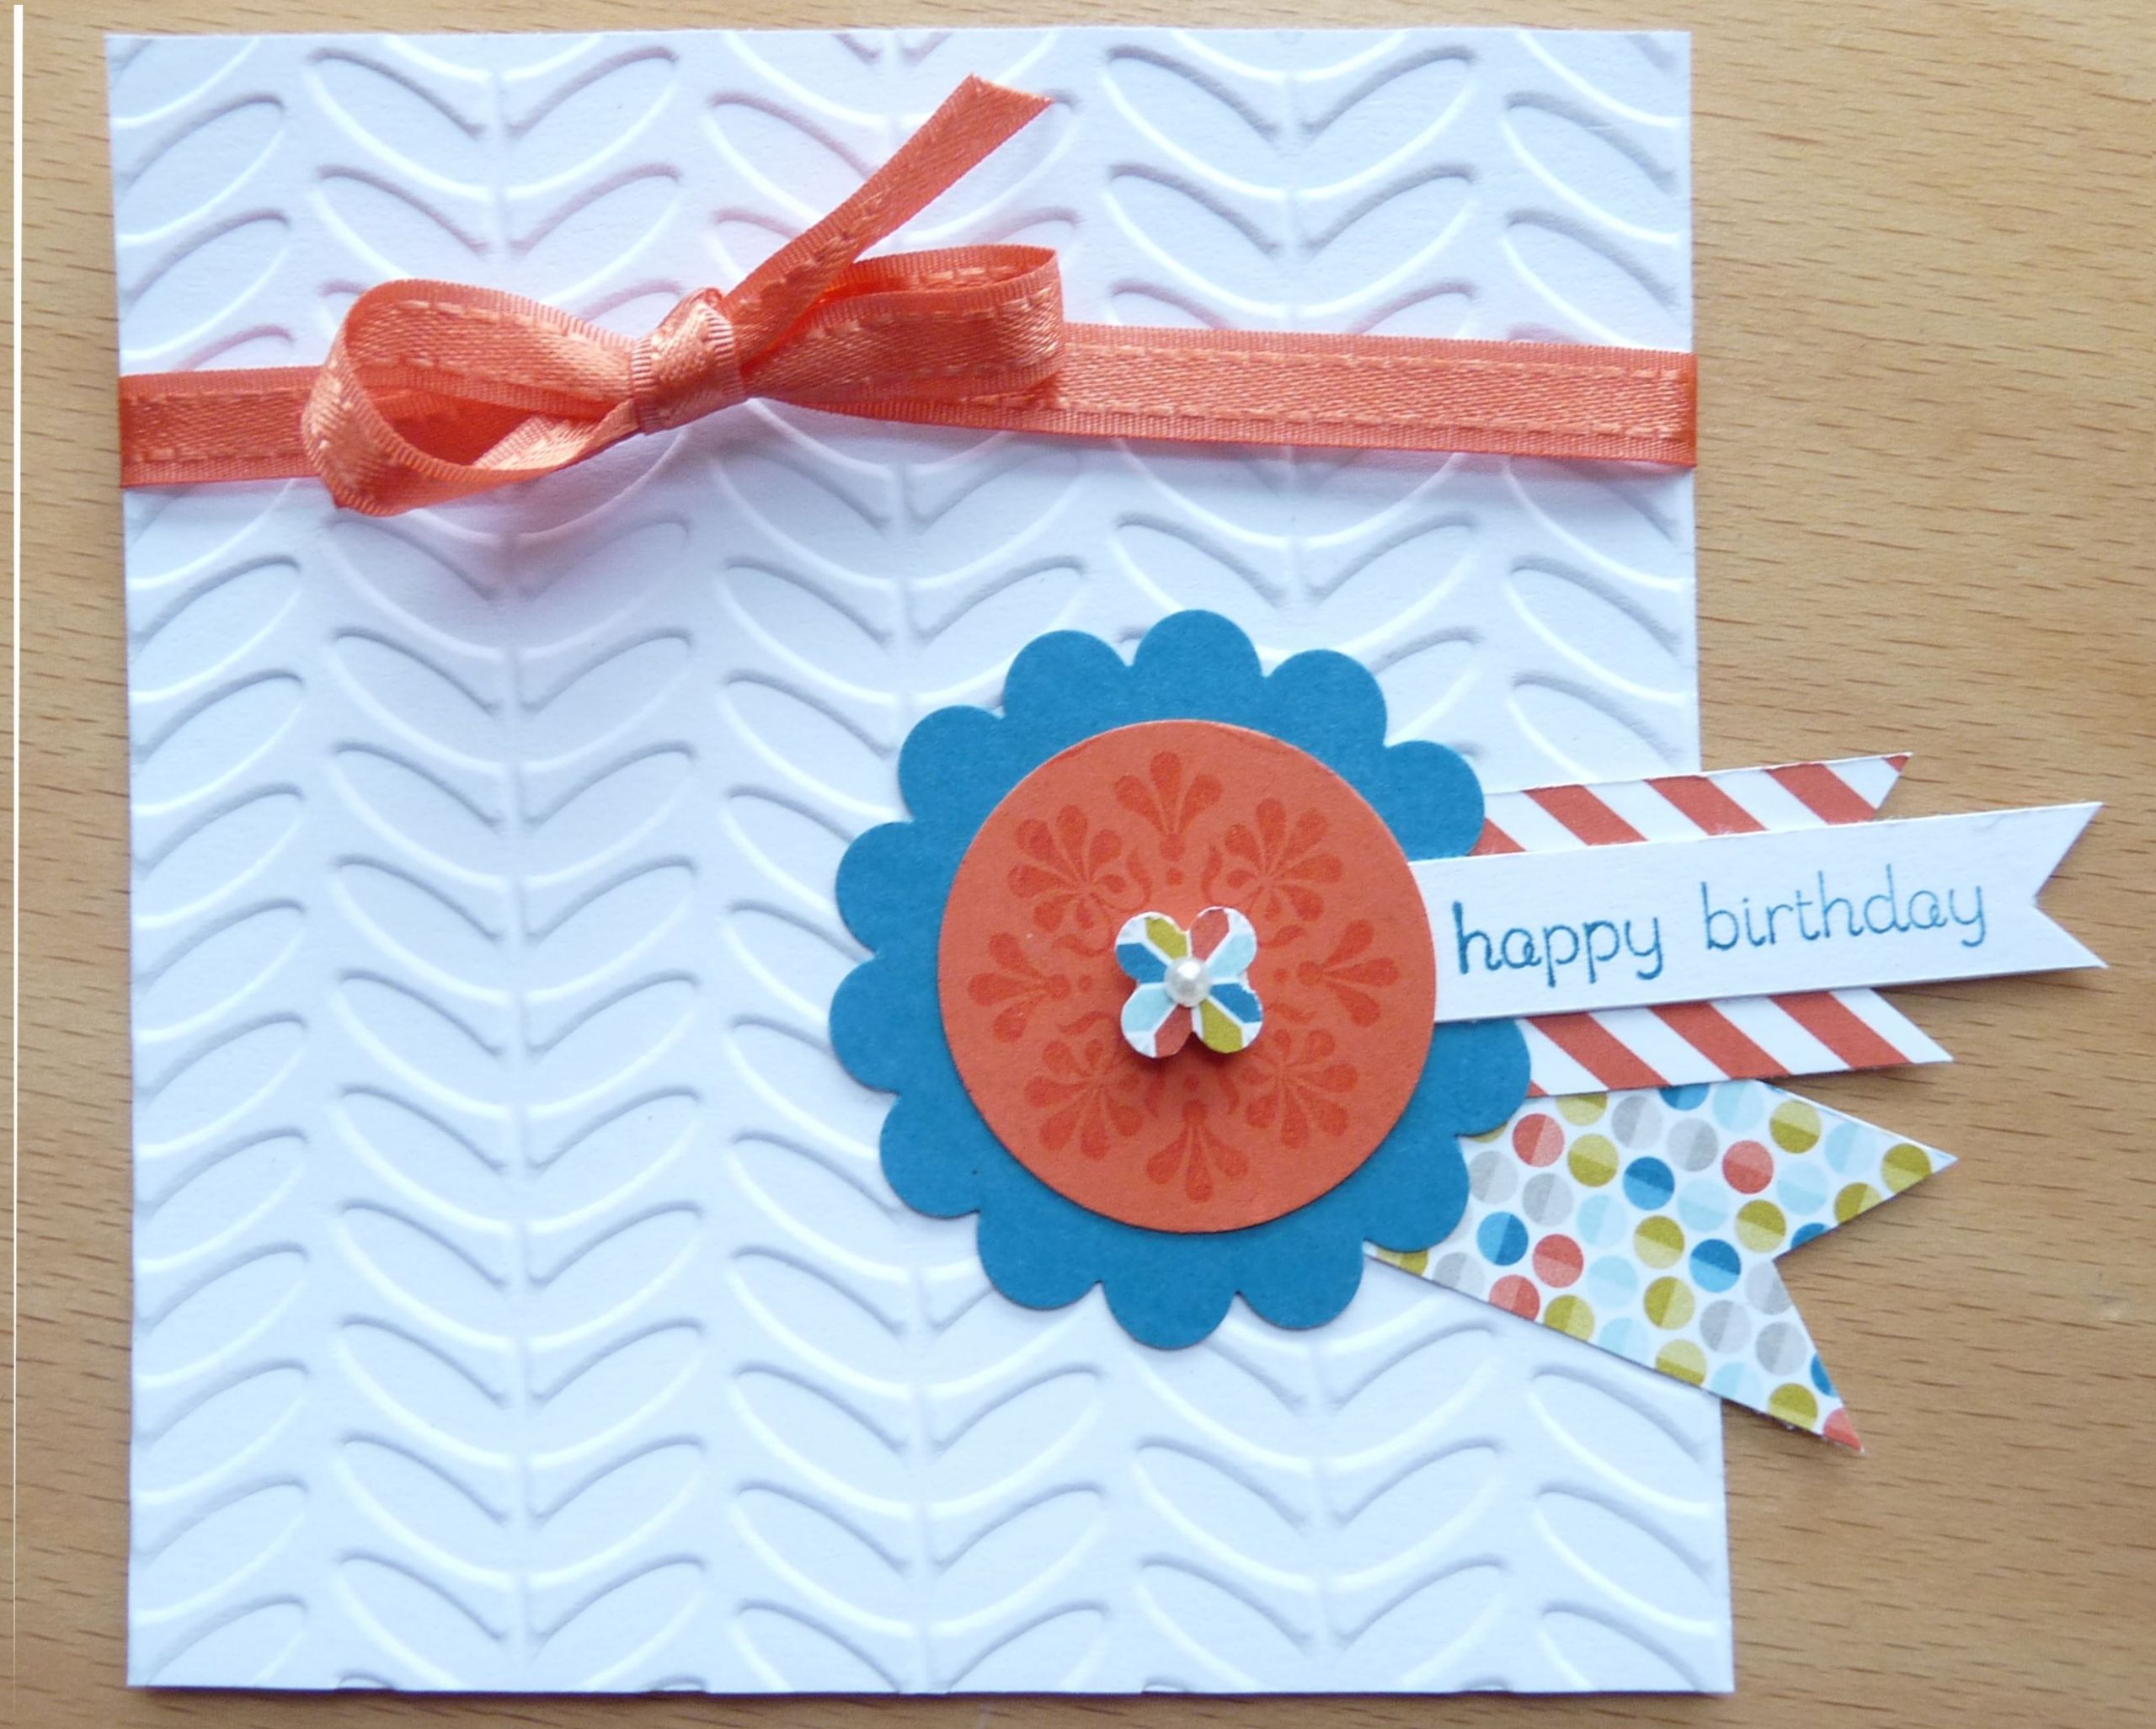 Birthday Gift For 9 Year Old Girl
 A birthday card made for a 9 year old girl For details go